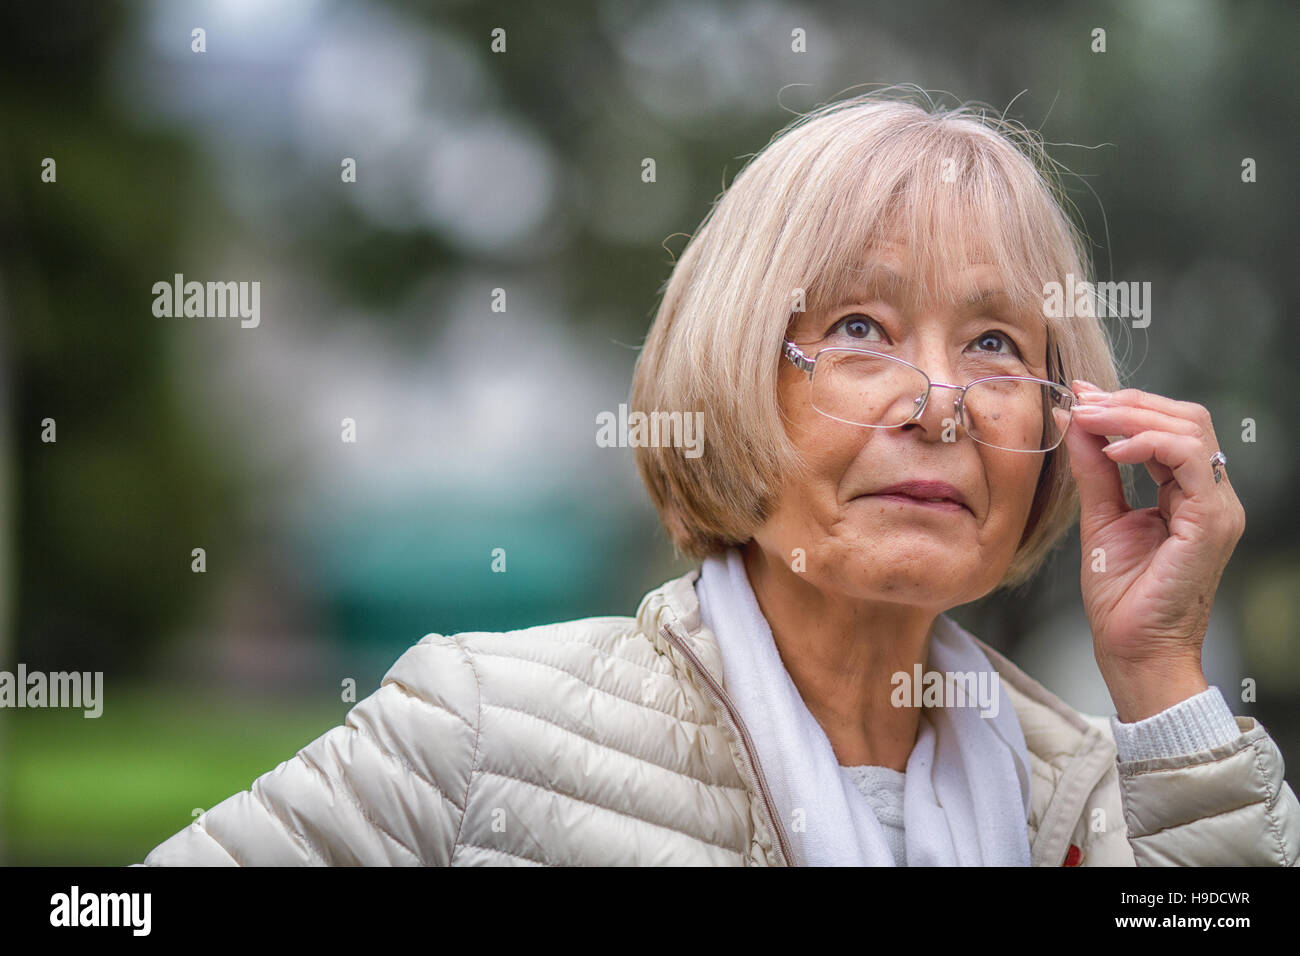 Elderly Japanese woman adjusts glasses whilst looking up Stock Photo